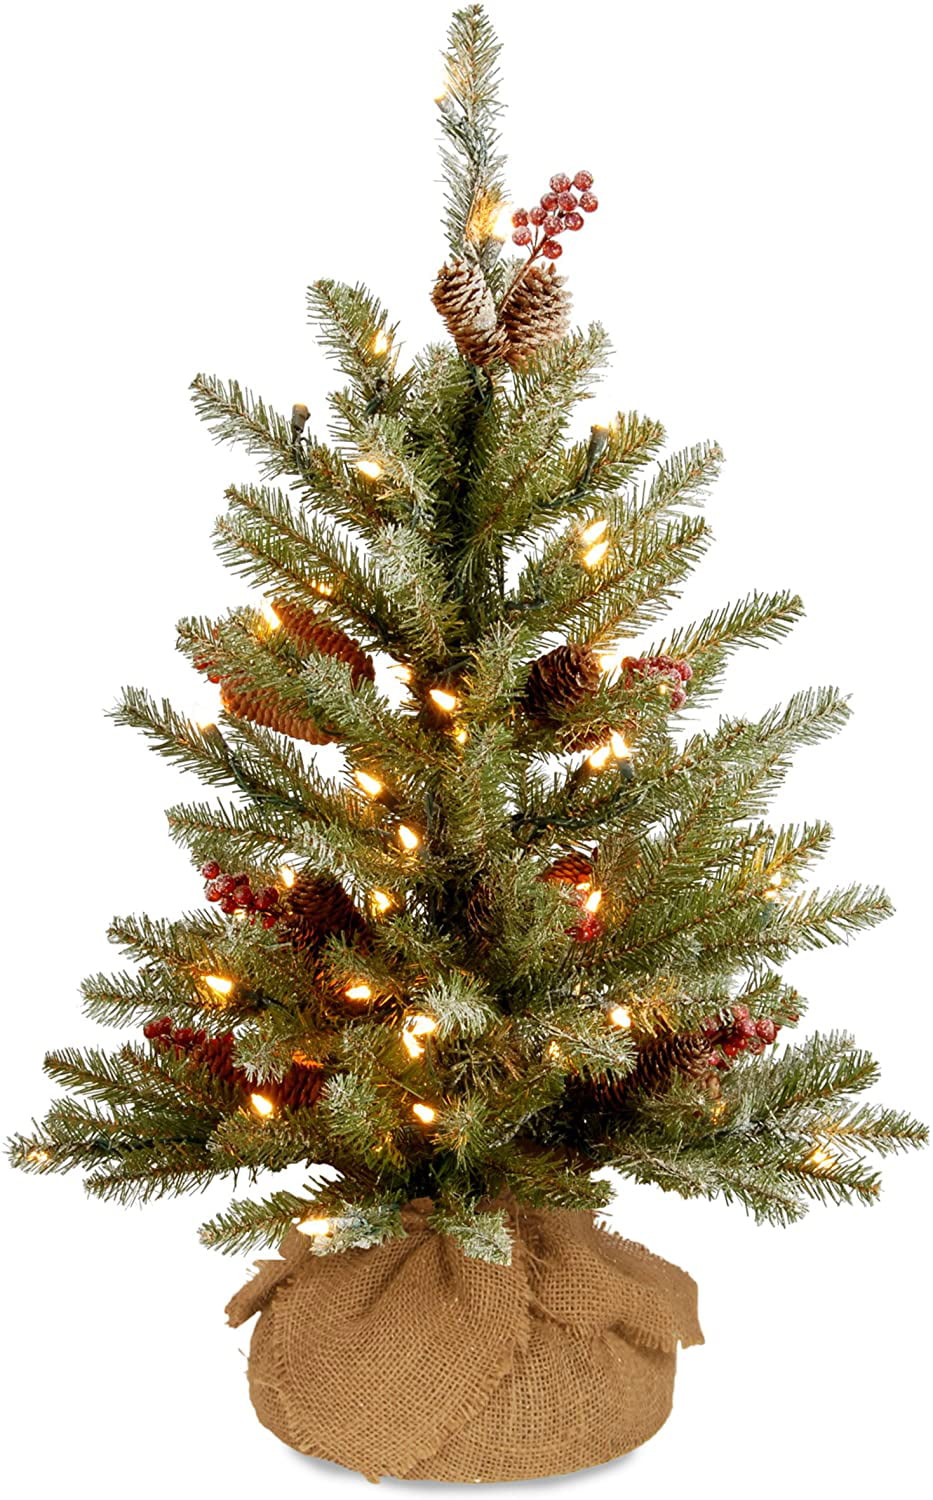 Small Artificial Christmas Trees - Photos All Recommendation